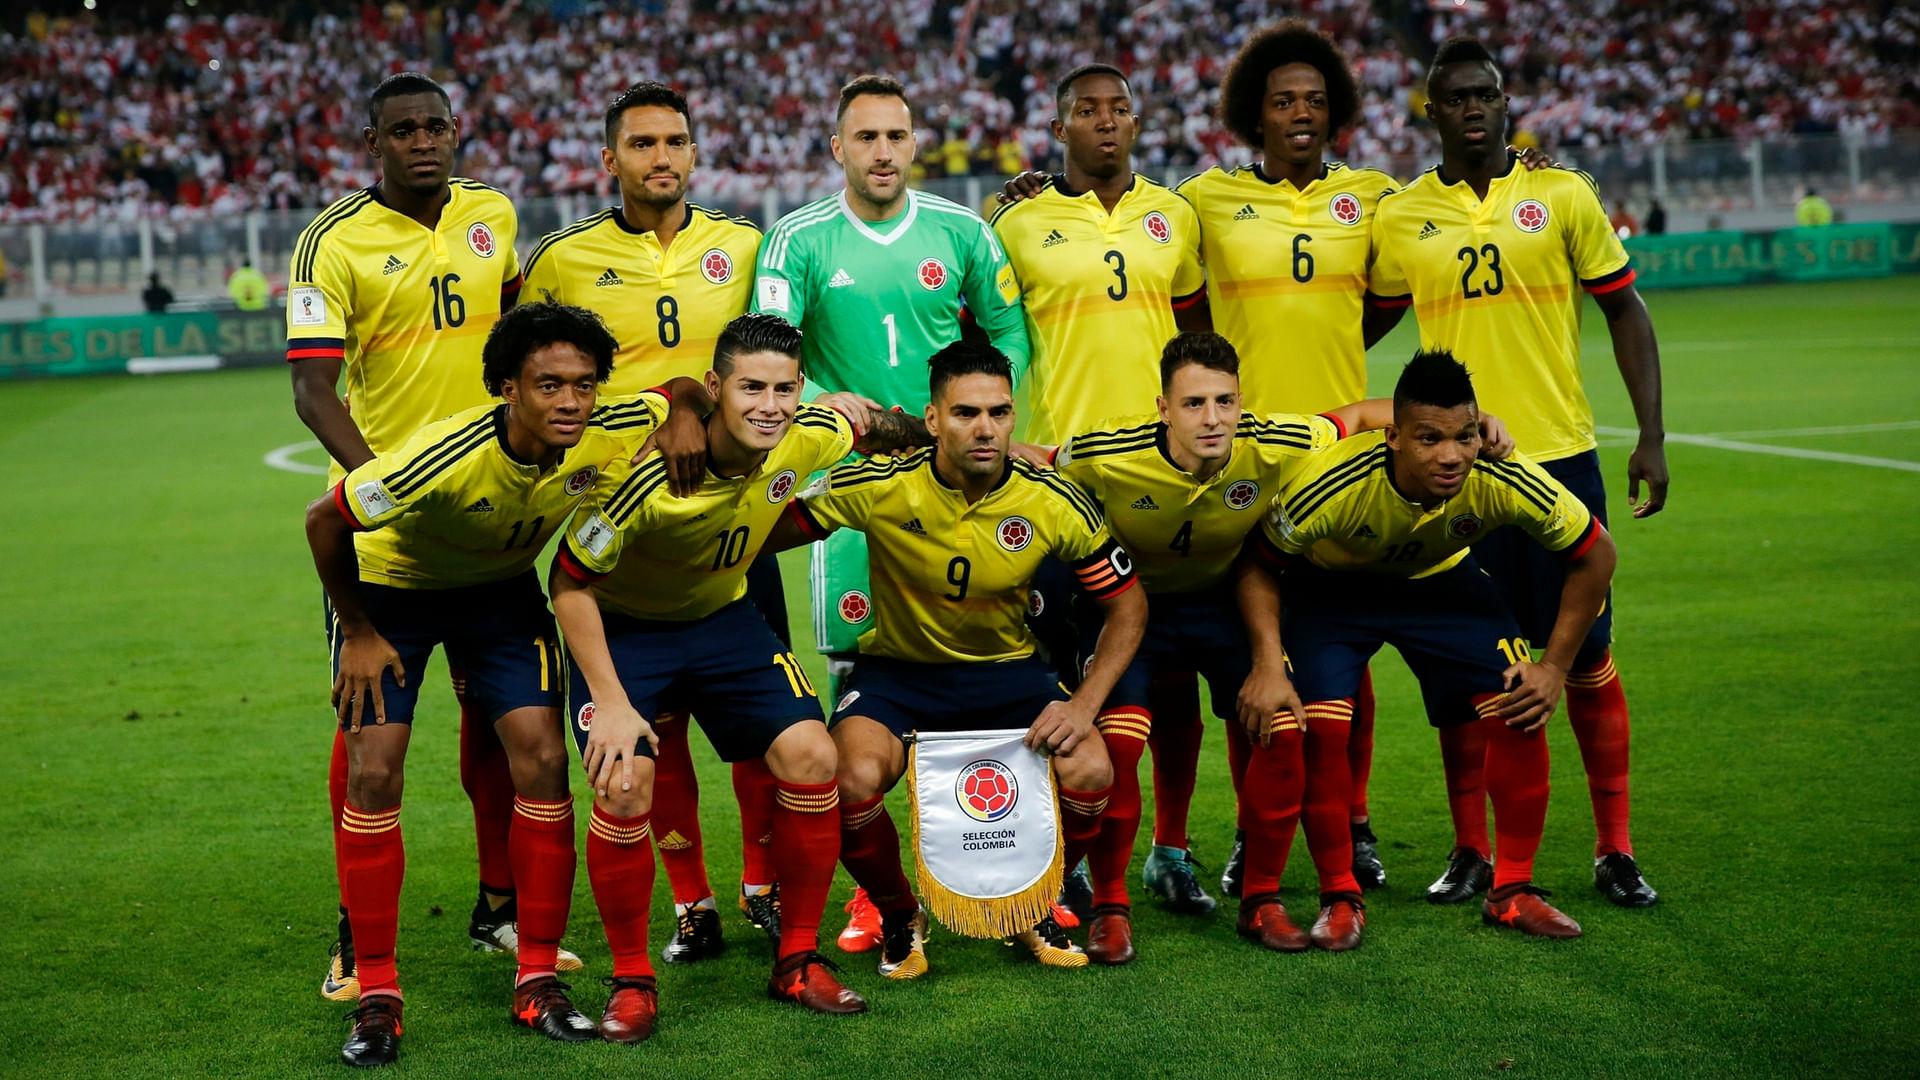 The Colombian football team has the talent to compete with the best, but it must utilise it to pass even a difficult group